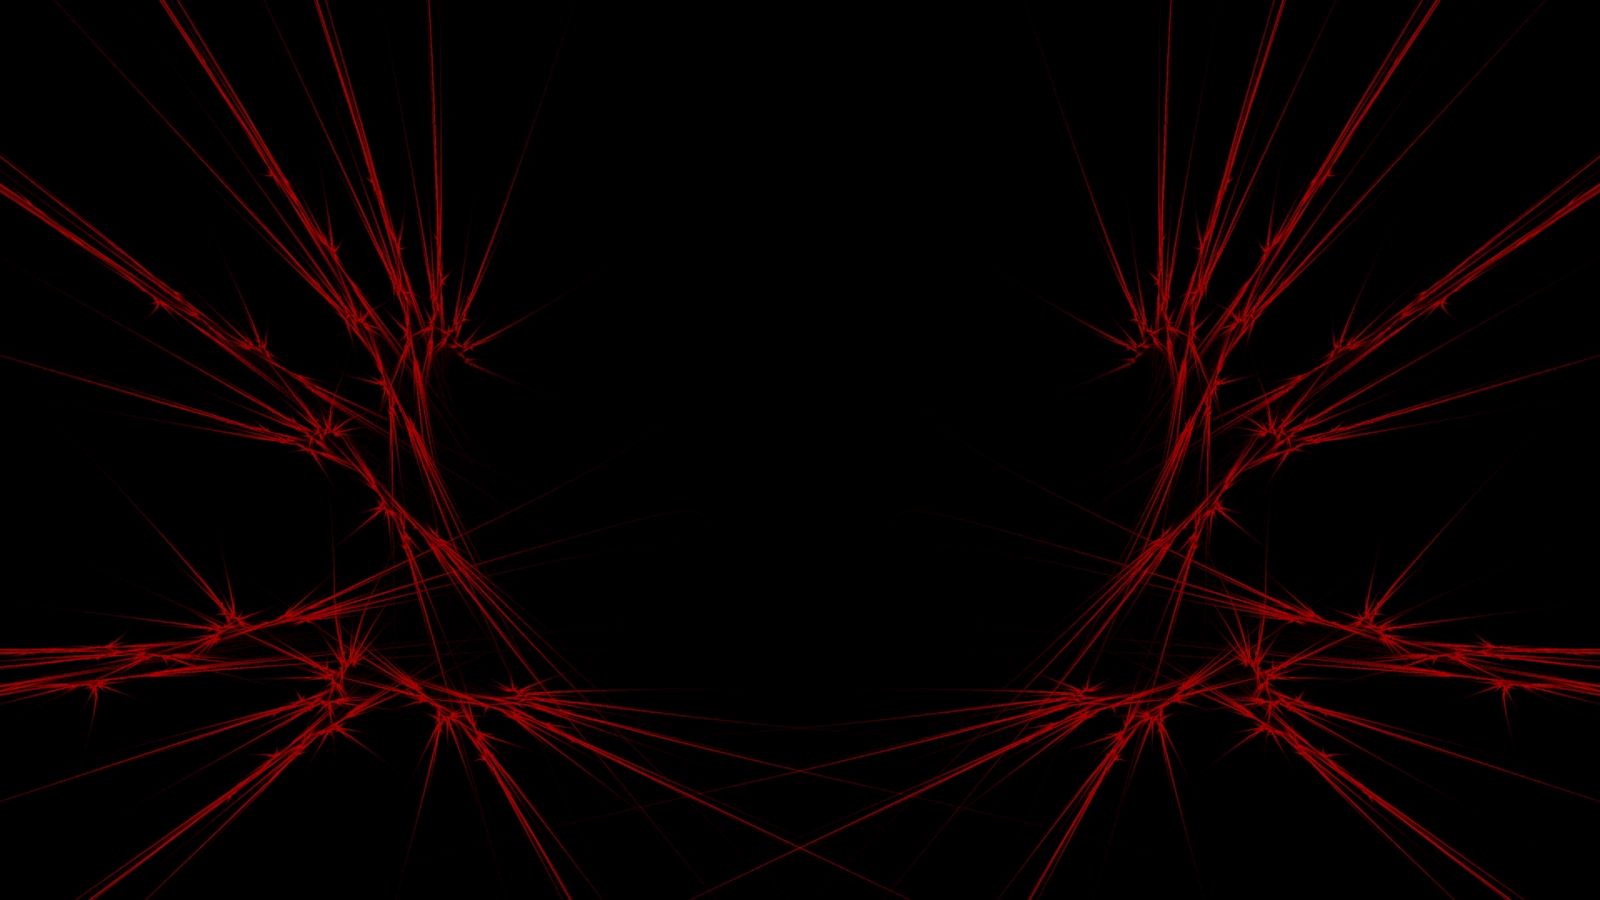 Download wallpaper 1600x900 red, black, abstract widescreen 16:9 hd  background